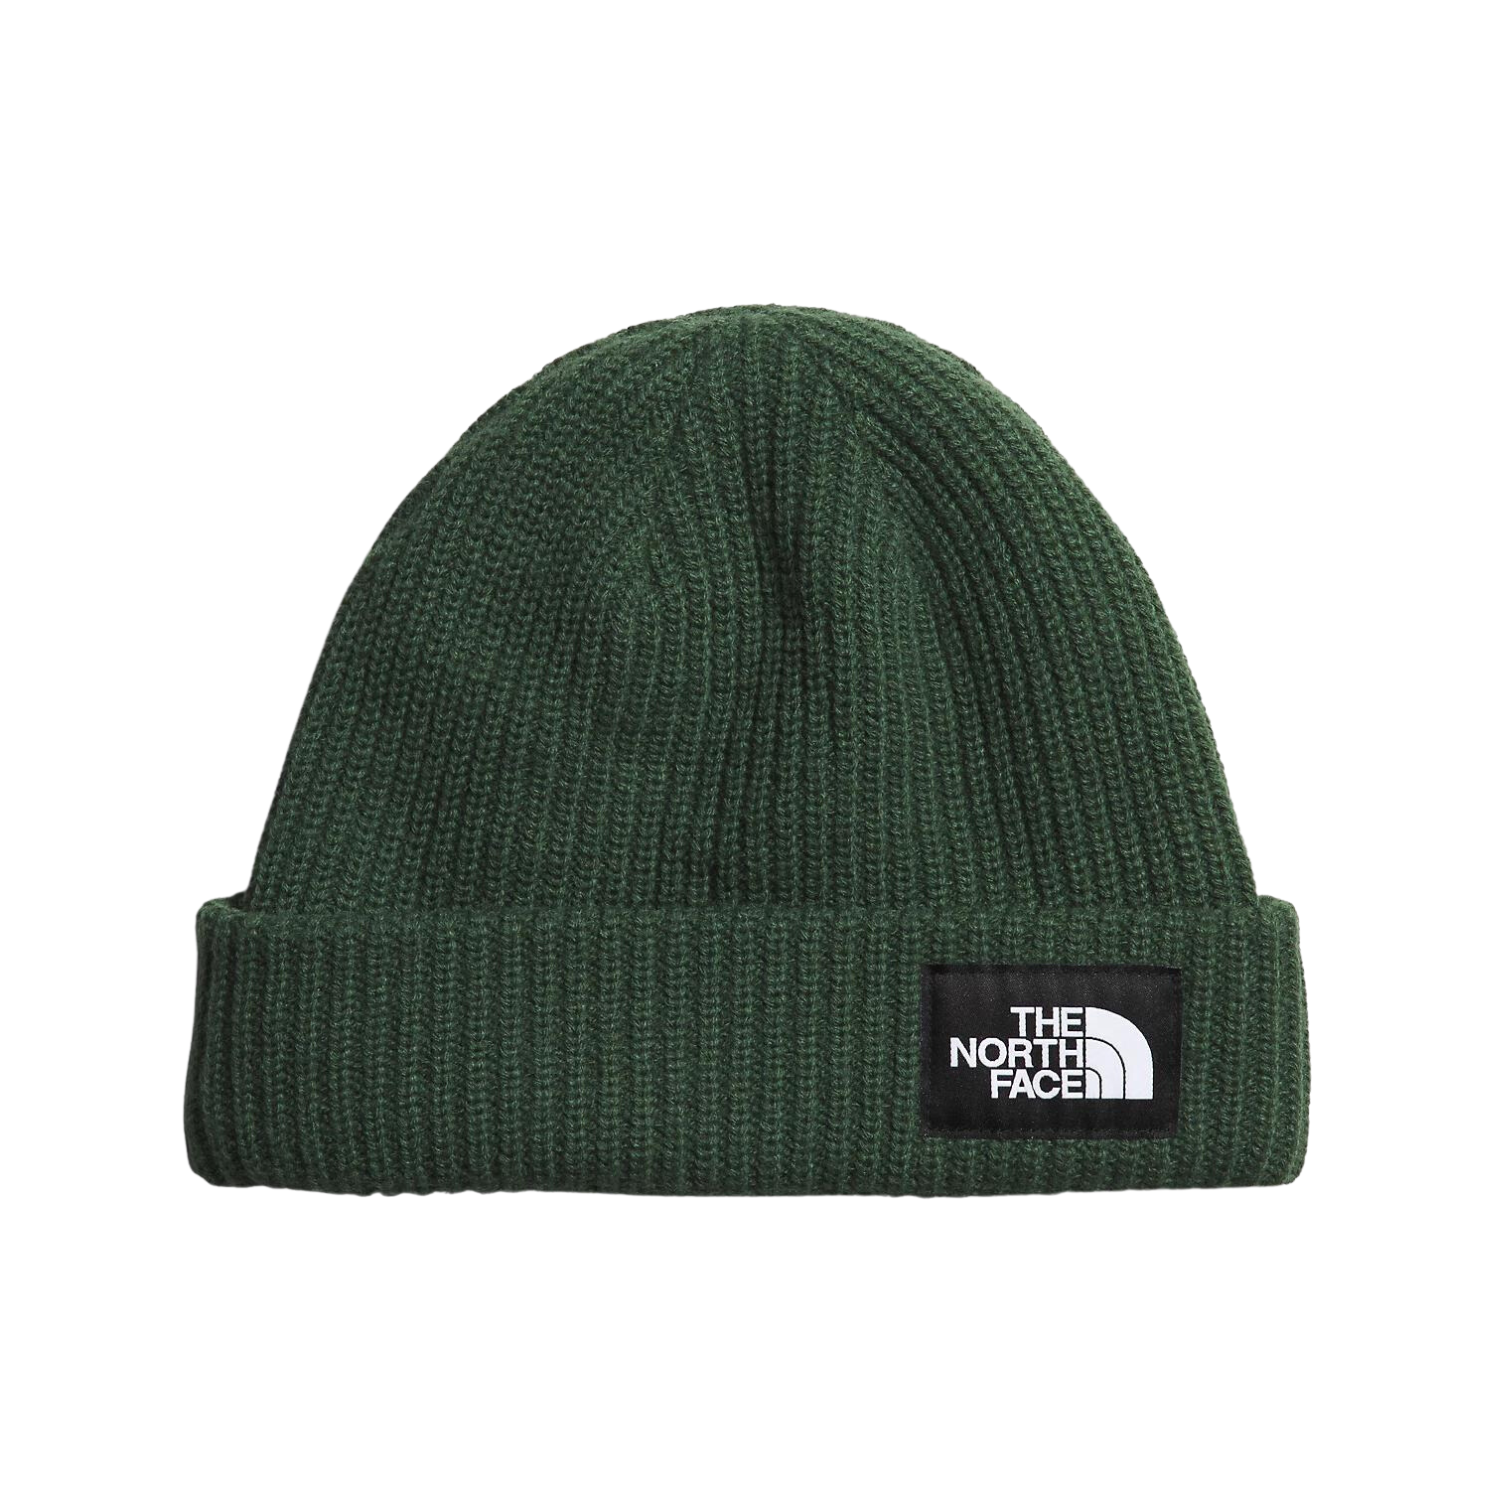 SALTY LINED BEANIE - PINE NEEDLE